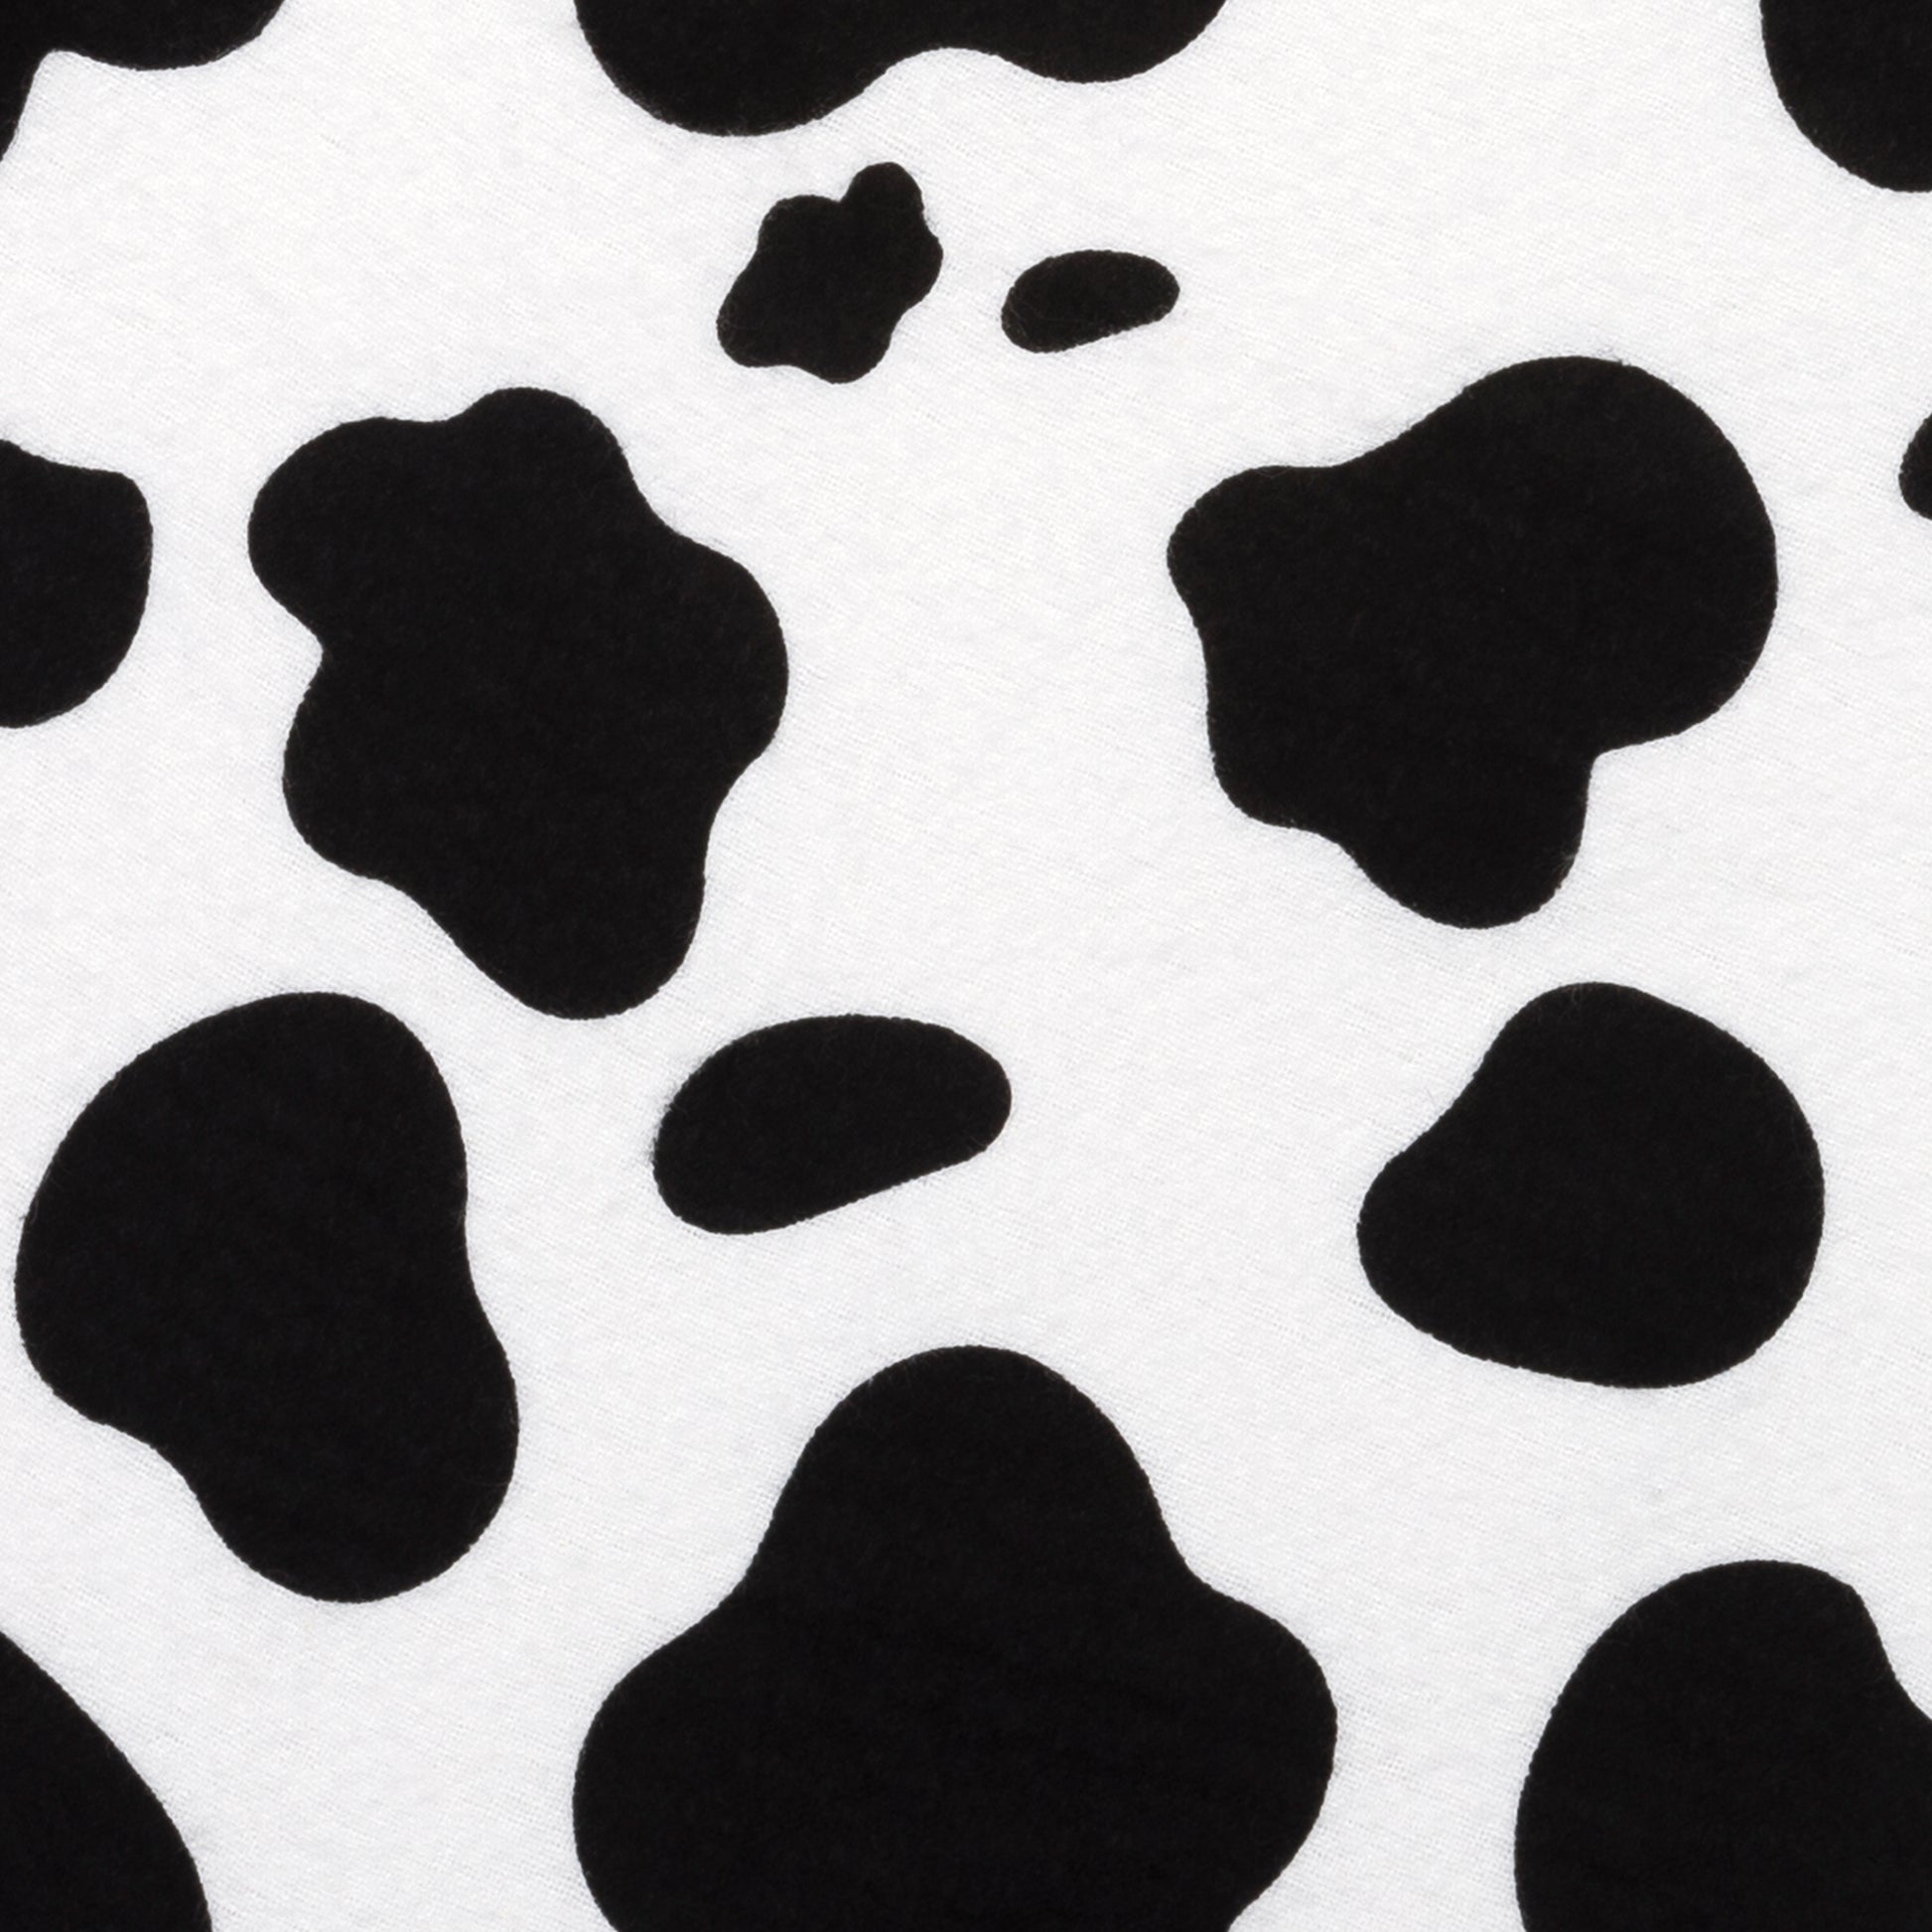  Black & White Cow Print Deluxe Flannel Fitted Crib Sheet - swatch view